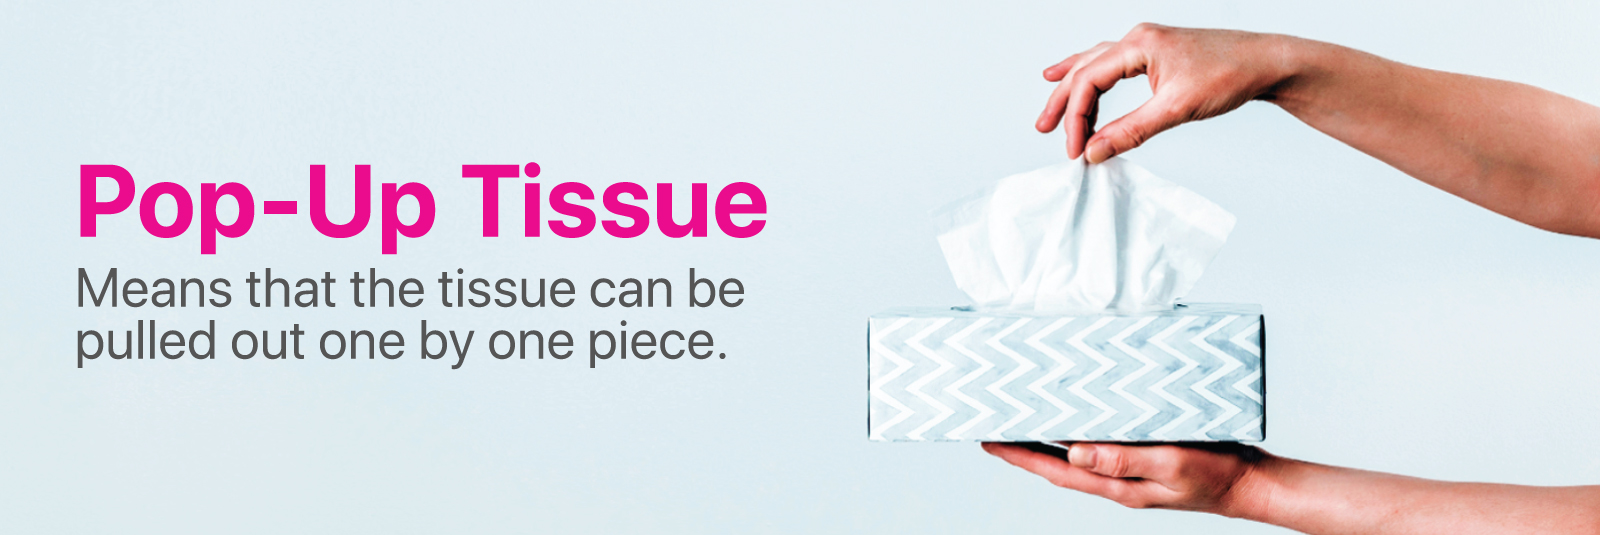 Pop-Up Tissue - Means that the tissue can be pulled out one by one piece.